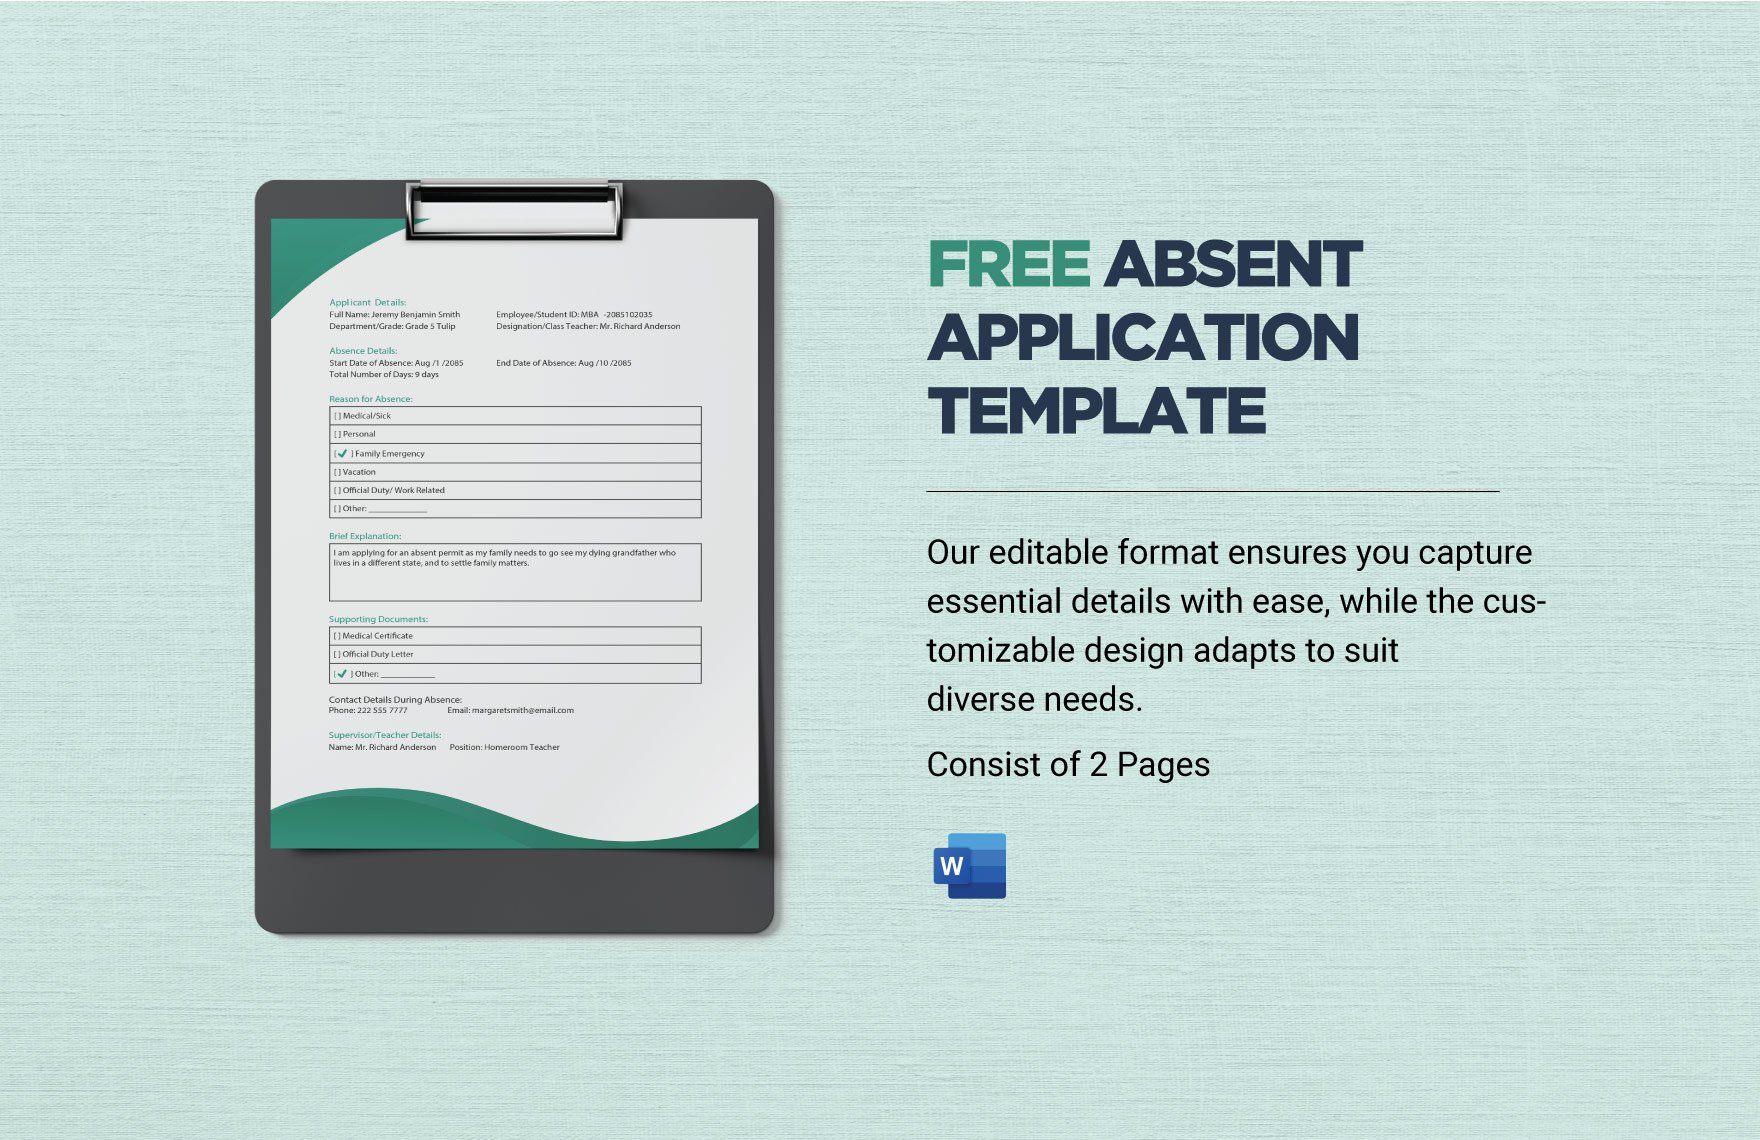 Free Absent Application Template